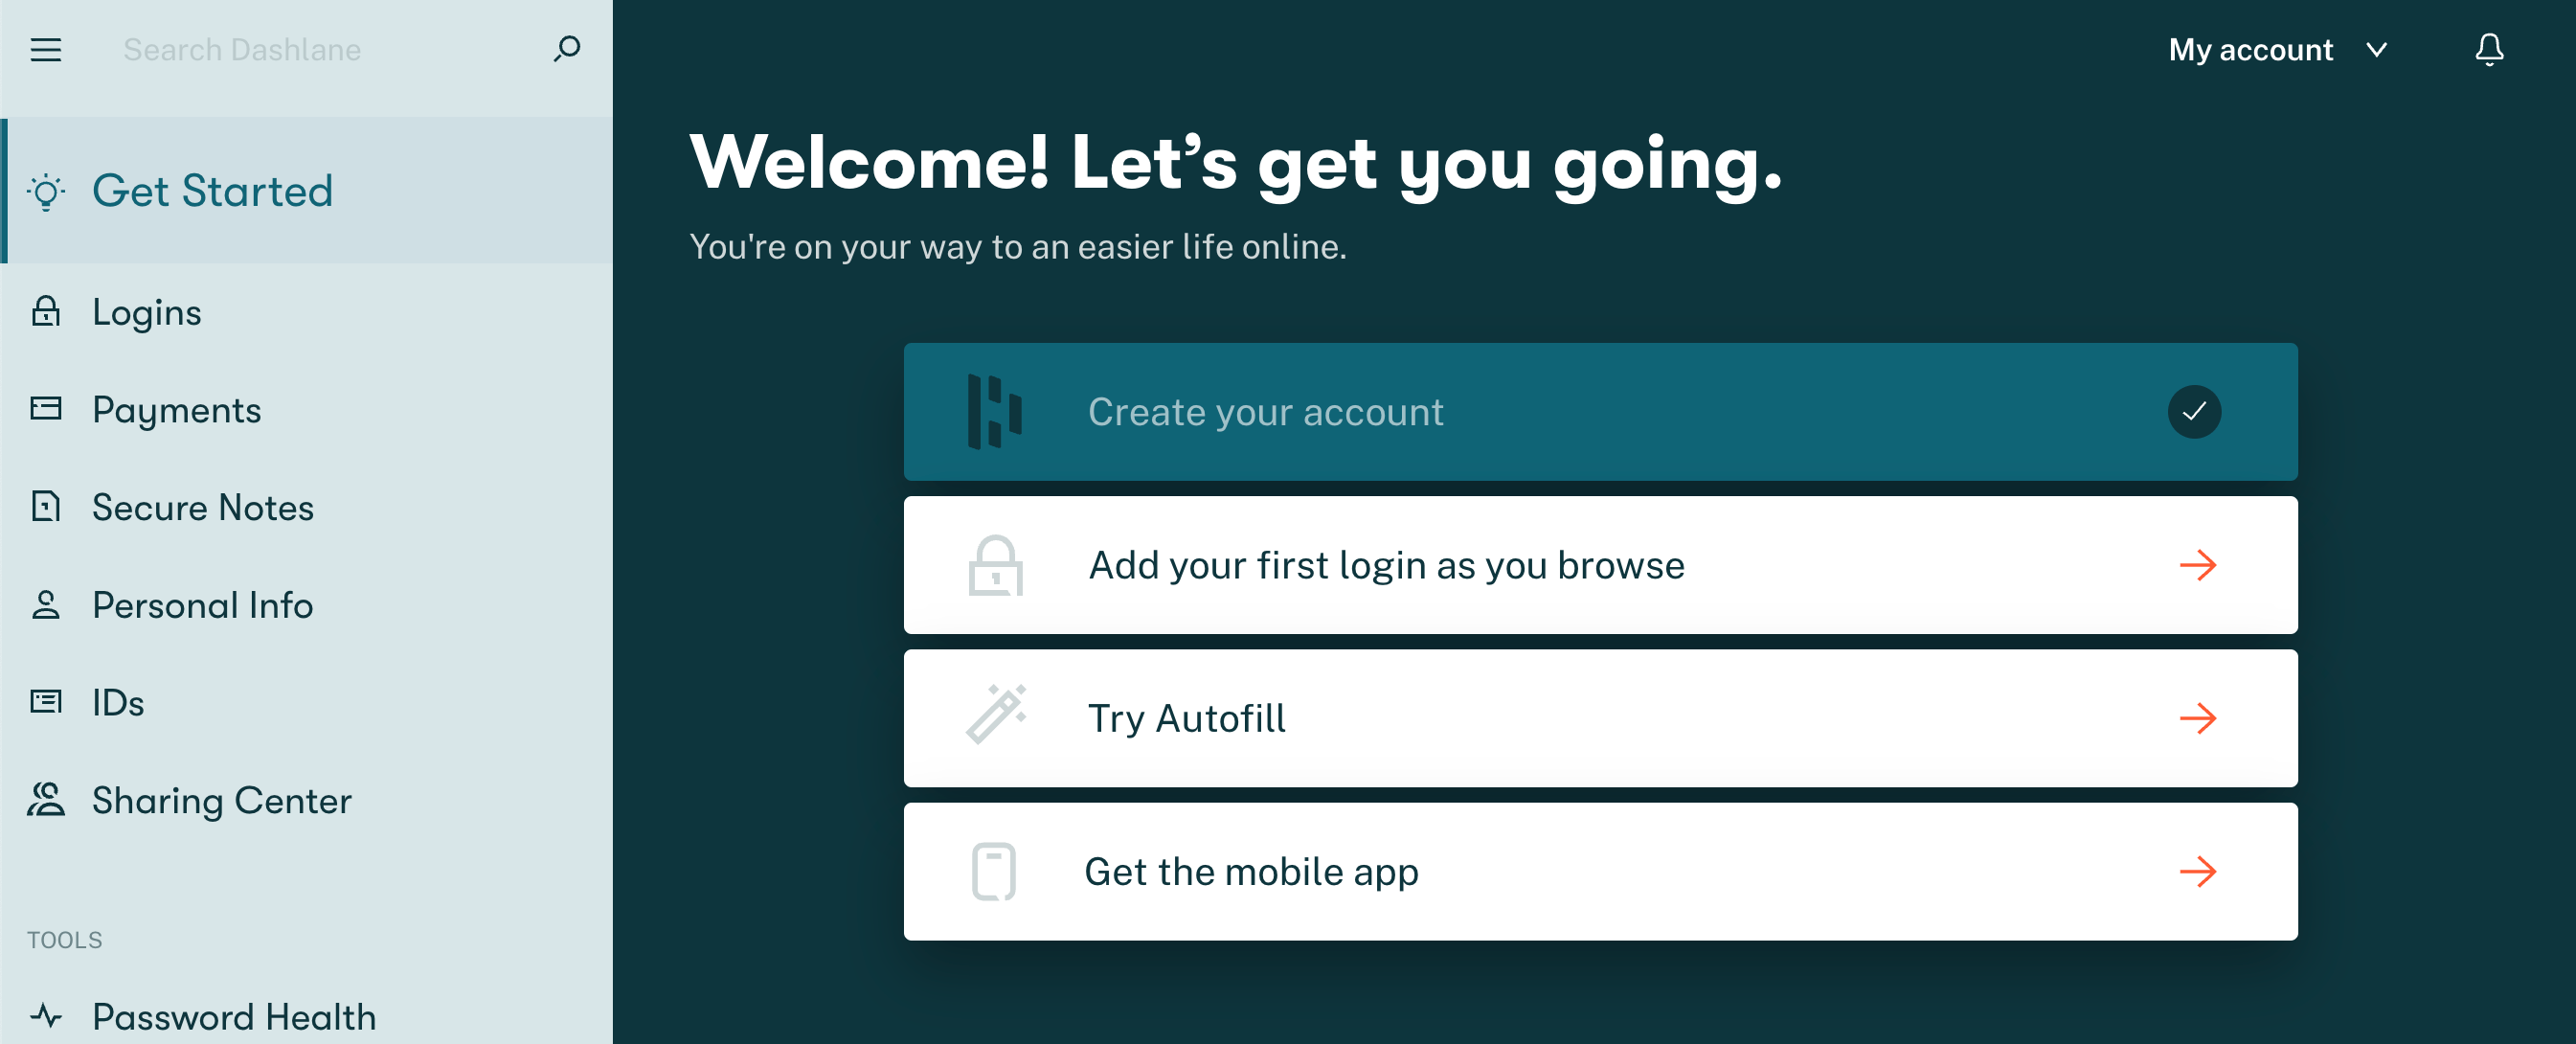 Dashlane Chrome Extension Welcome page